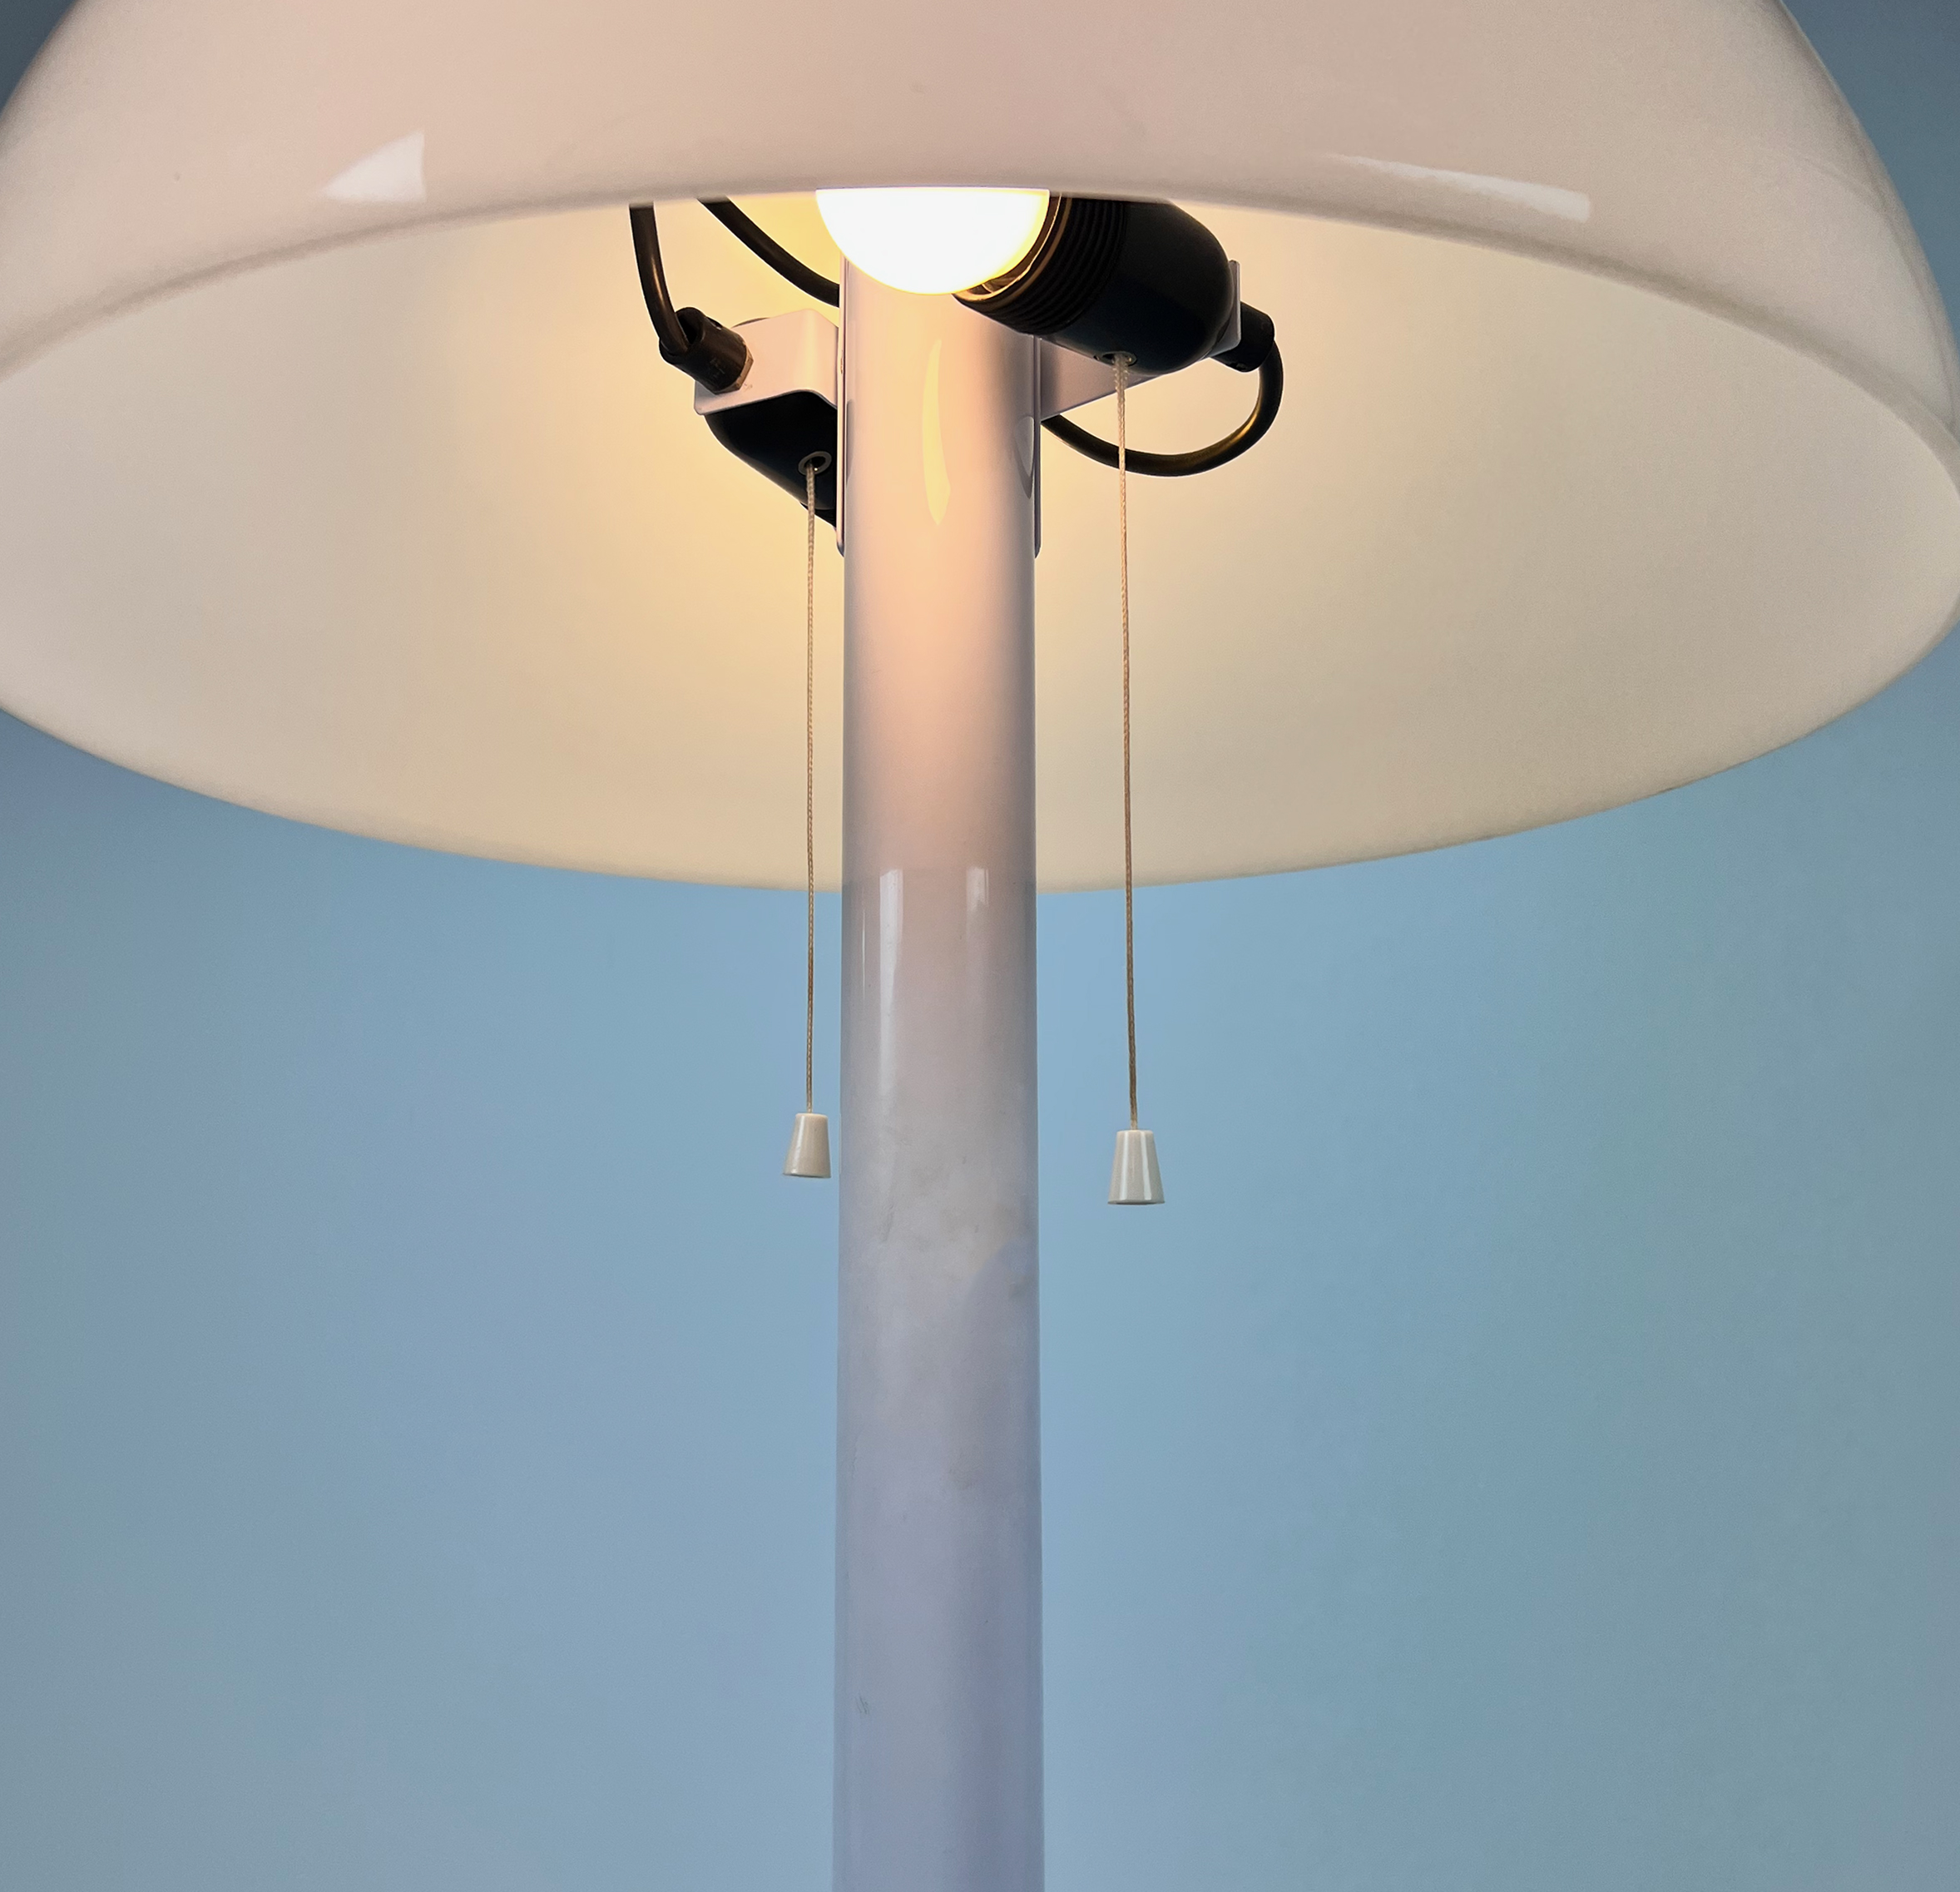 Space Age Mushroom Floorlamp by Martinelli Luce, 1970's